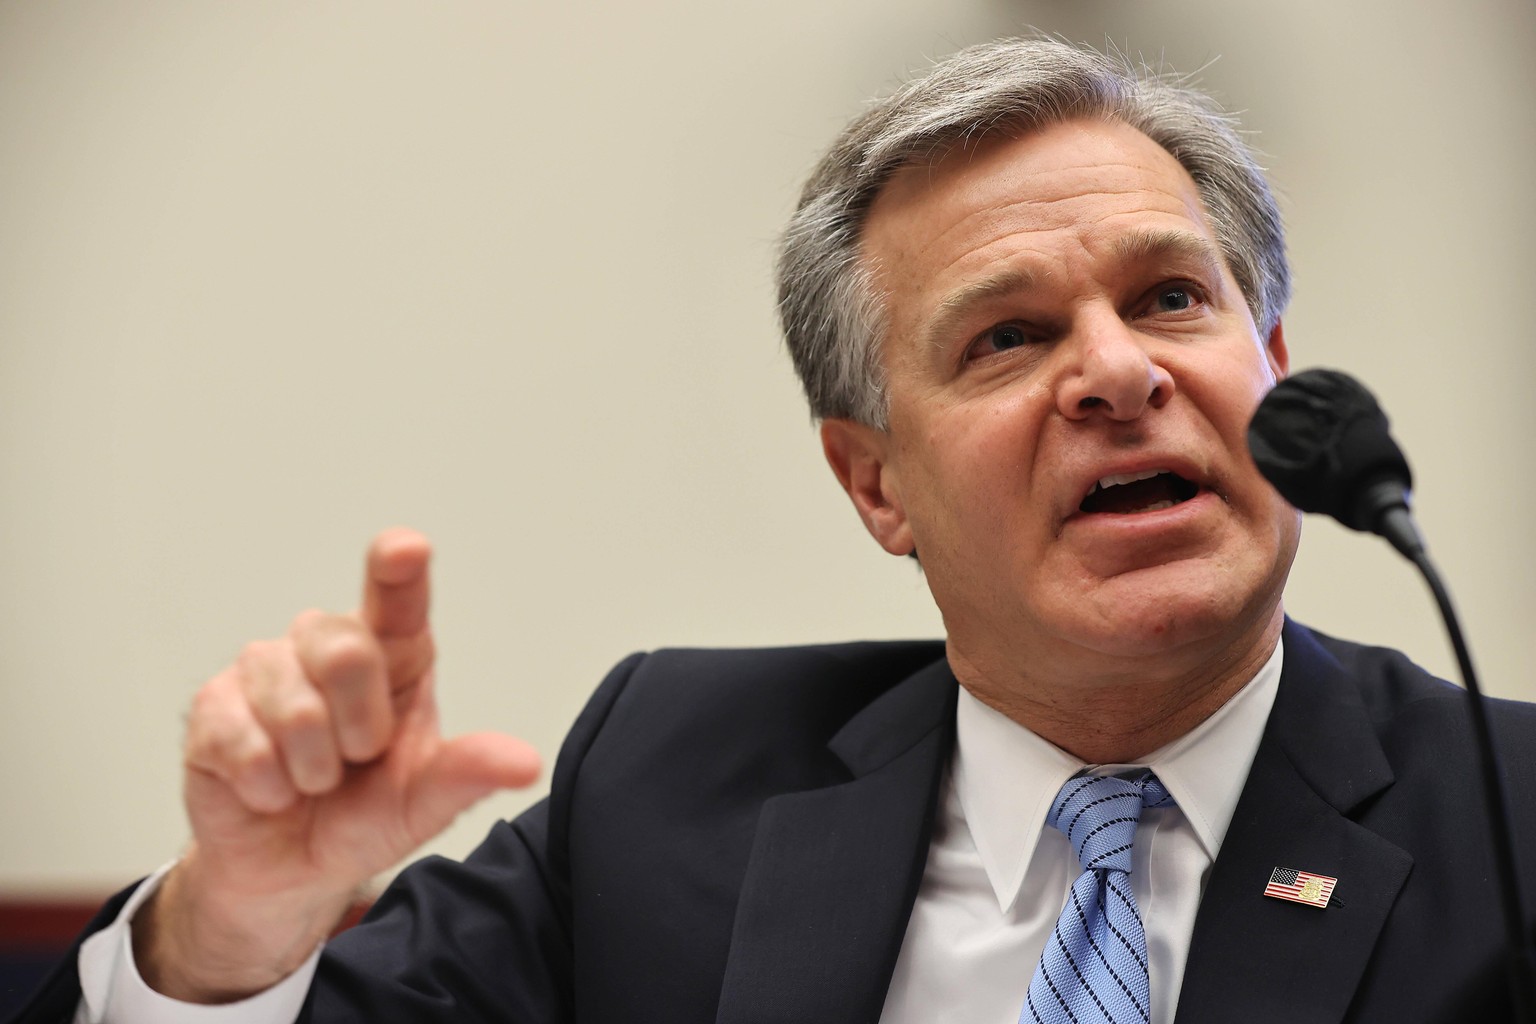 September 17, 2020, Washington, District of Columbia, USA: Federal Bureau of Investigation Director Christopher Wray testifies before the House Homeland Security Committee during a hearing about world ...